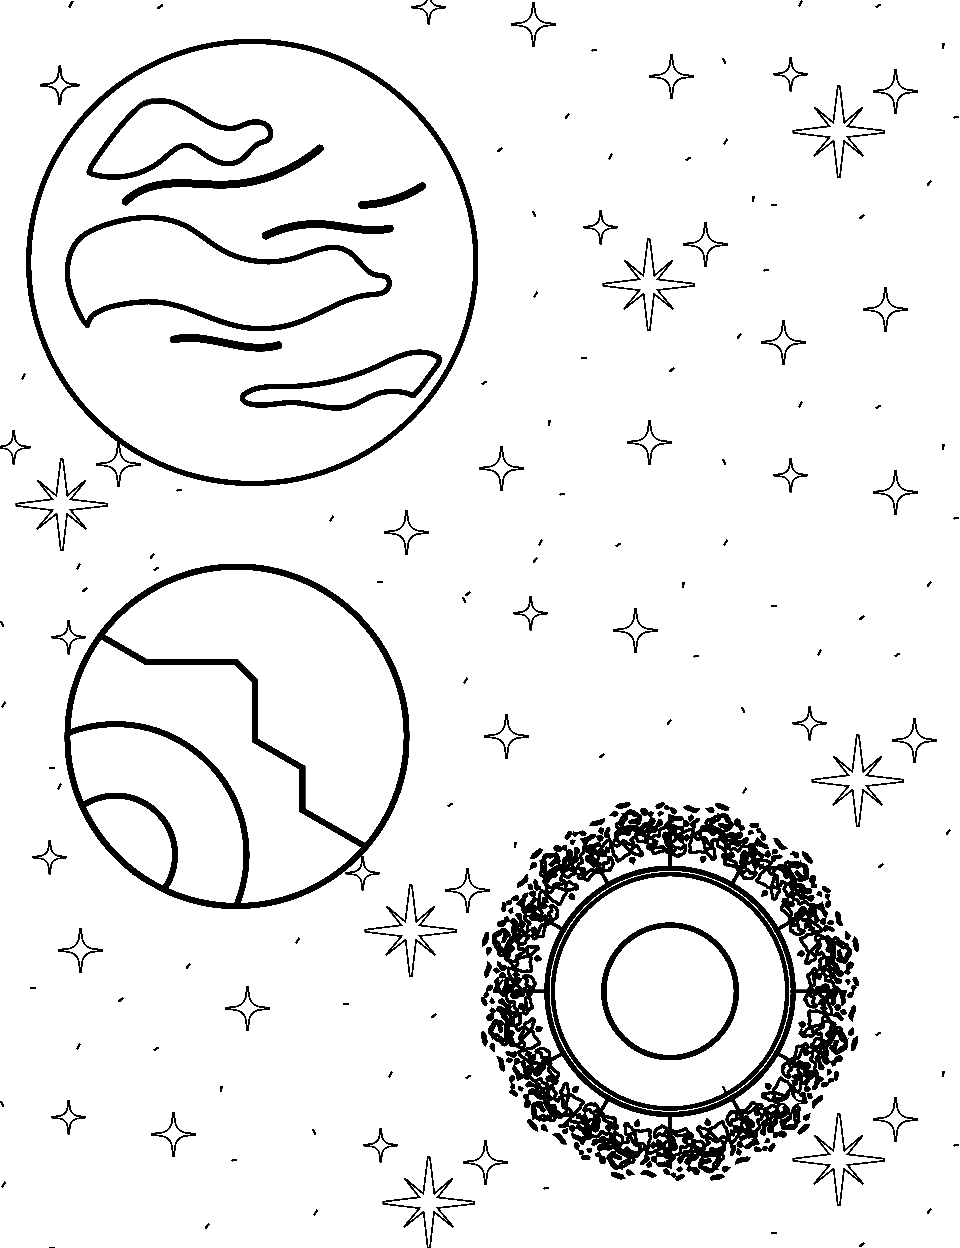 Art of the Astral Coloring Page - Abstract patterns of stars, planets, and nebulae.